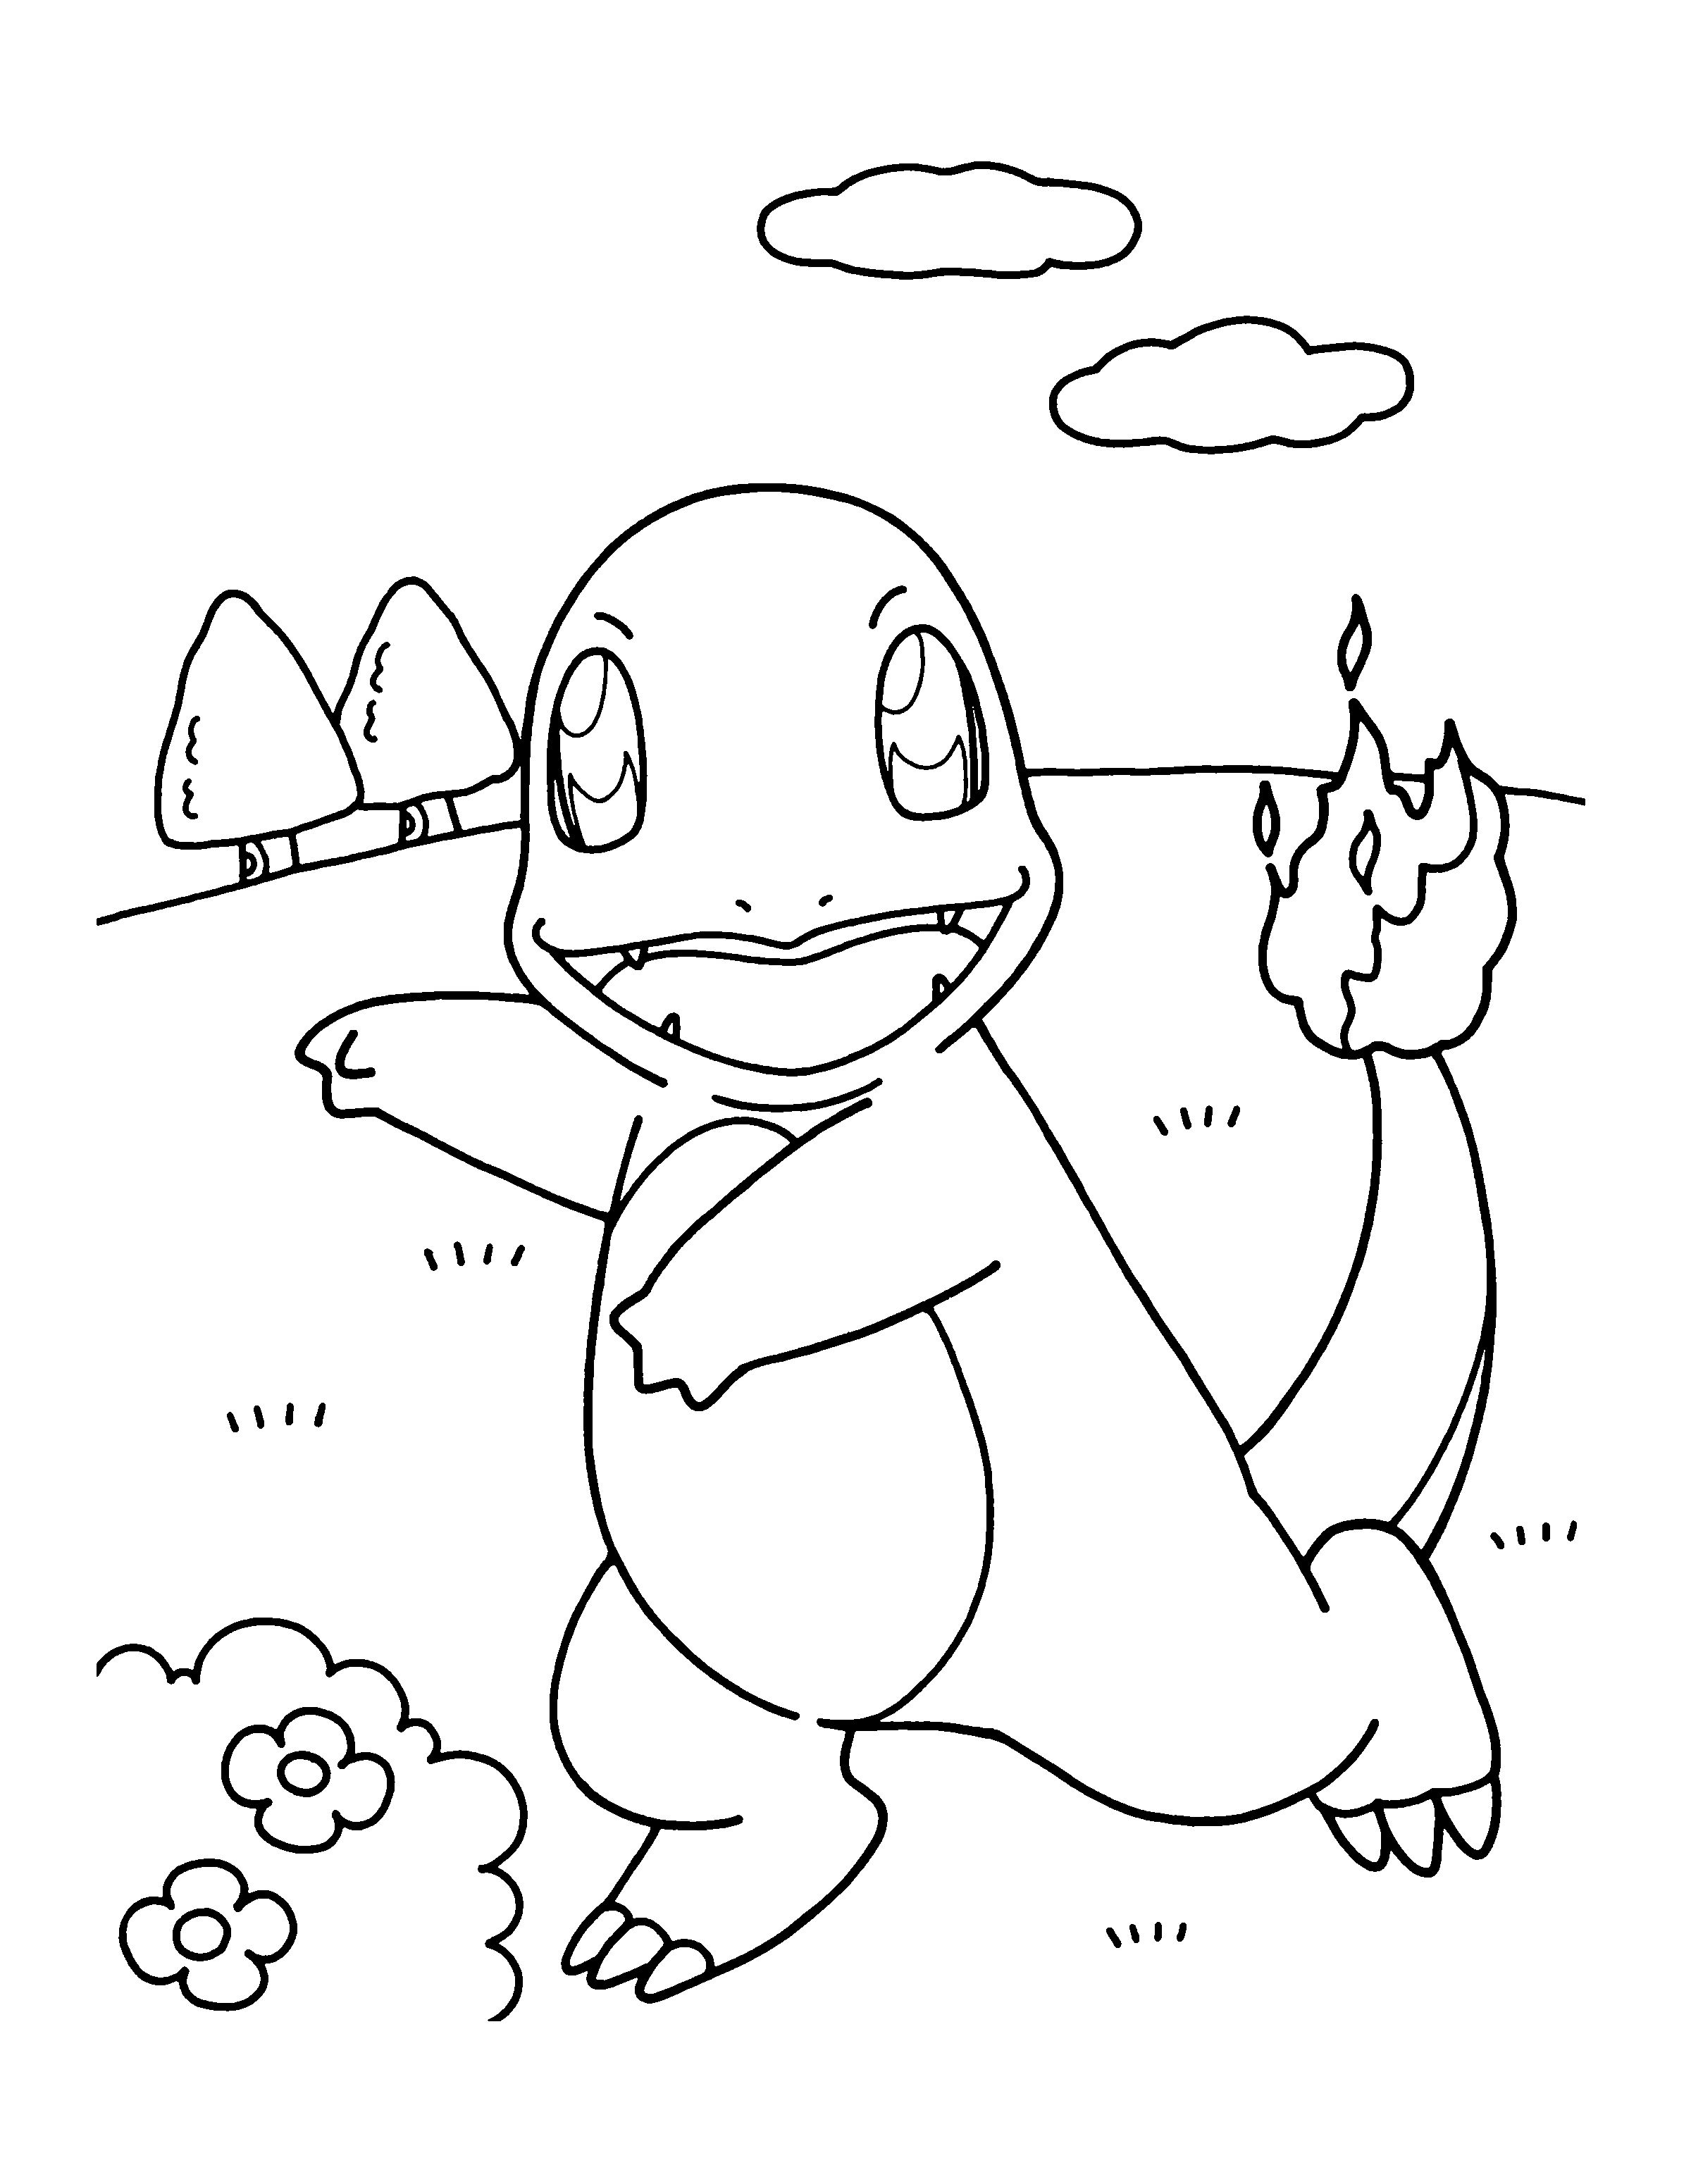 pokemon colouring pages online free all pokemon coloring pages download and print for free pokemon pages online colouring free 